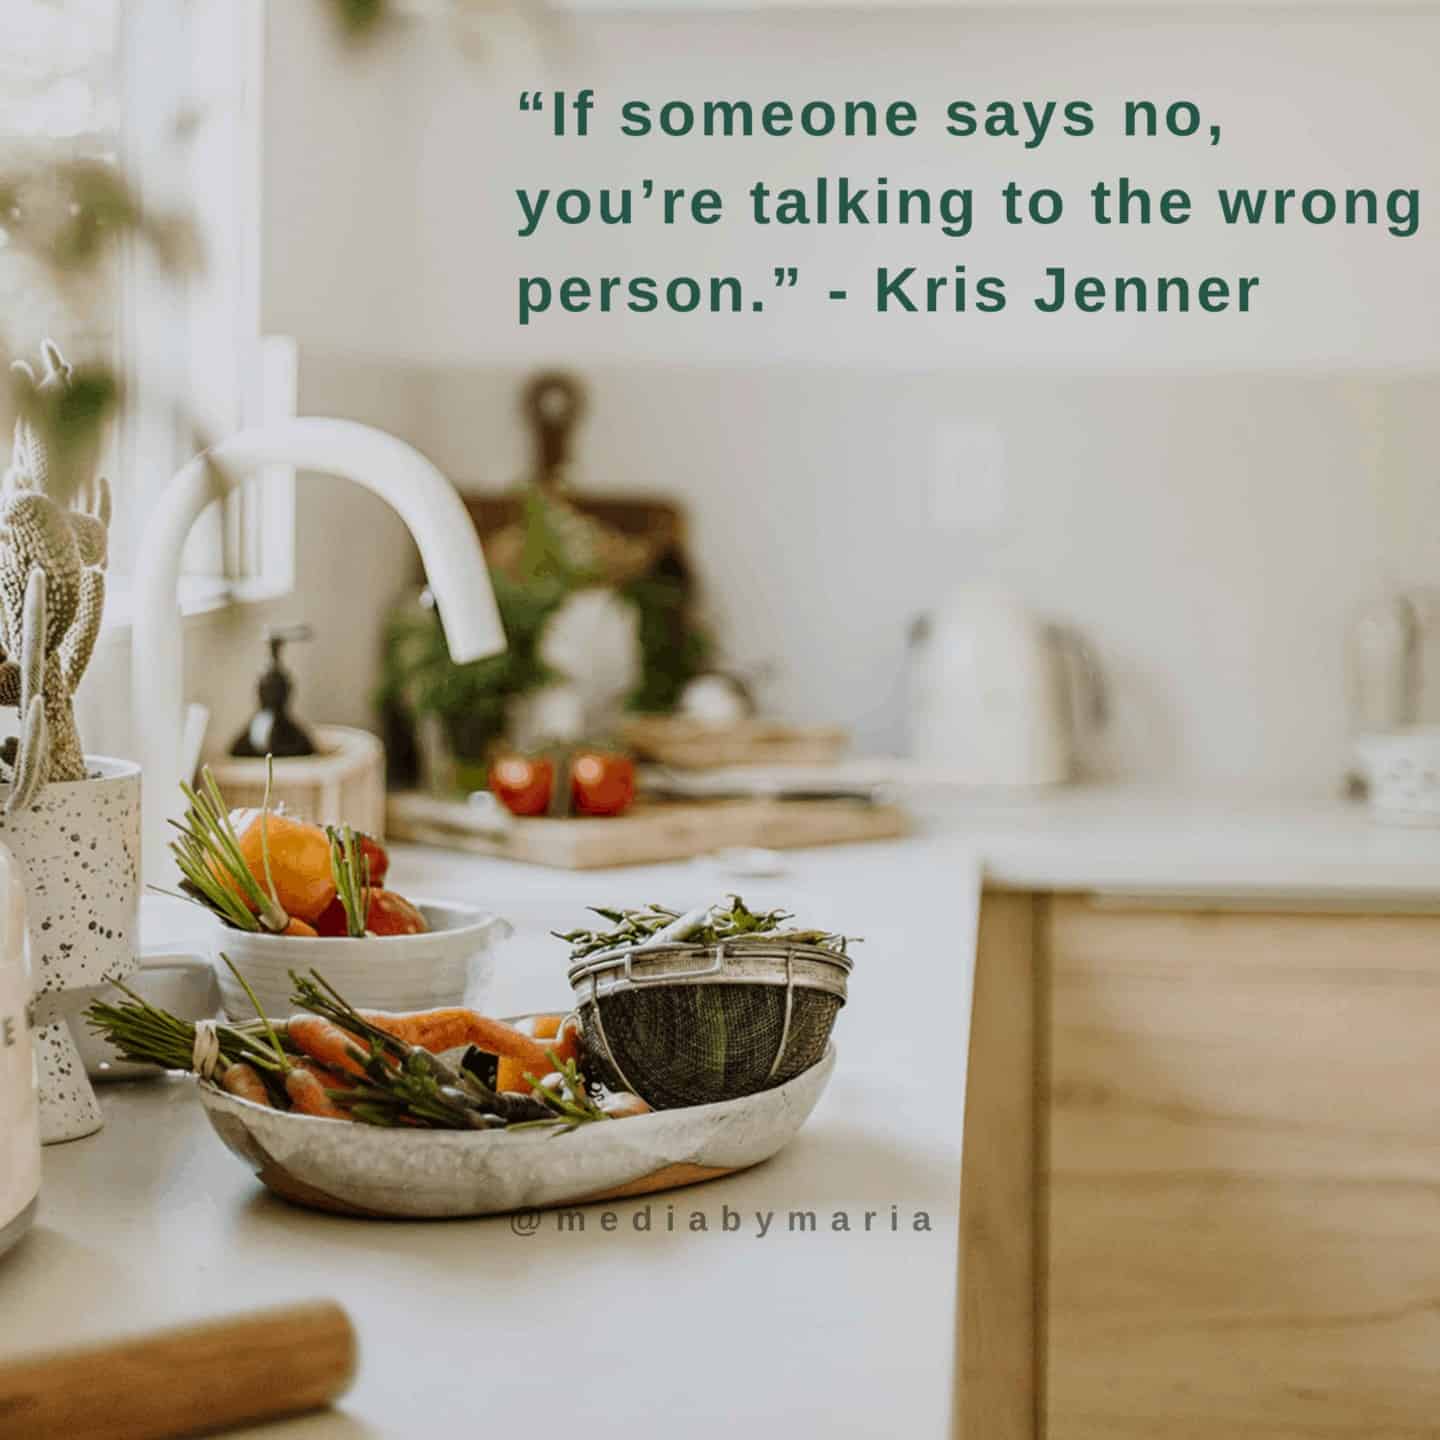 Kris Jenner quote set ontop of a kitchen setting